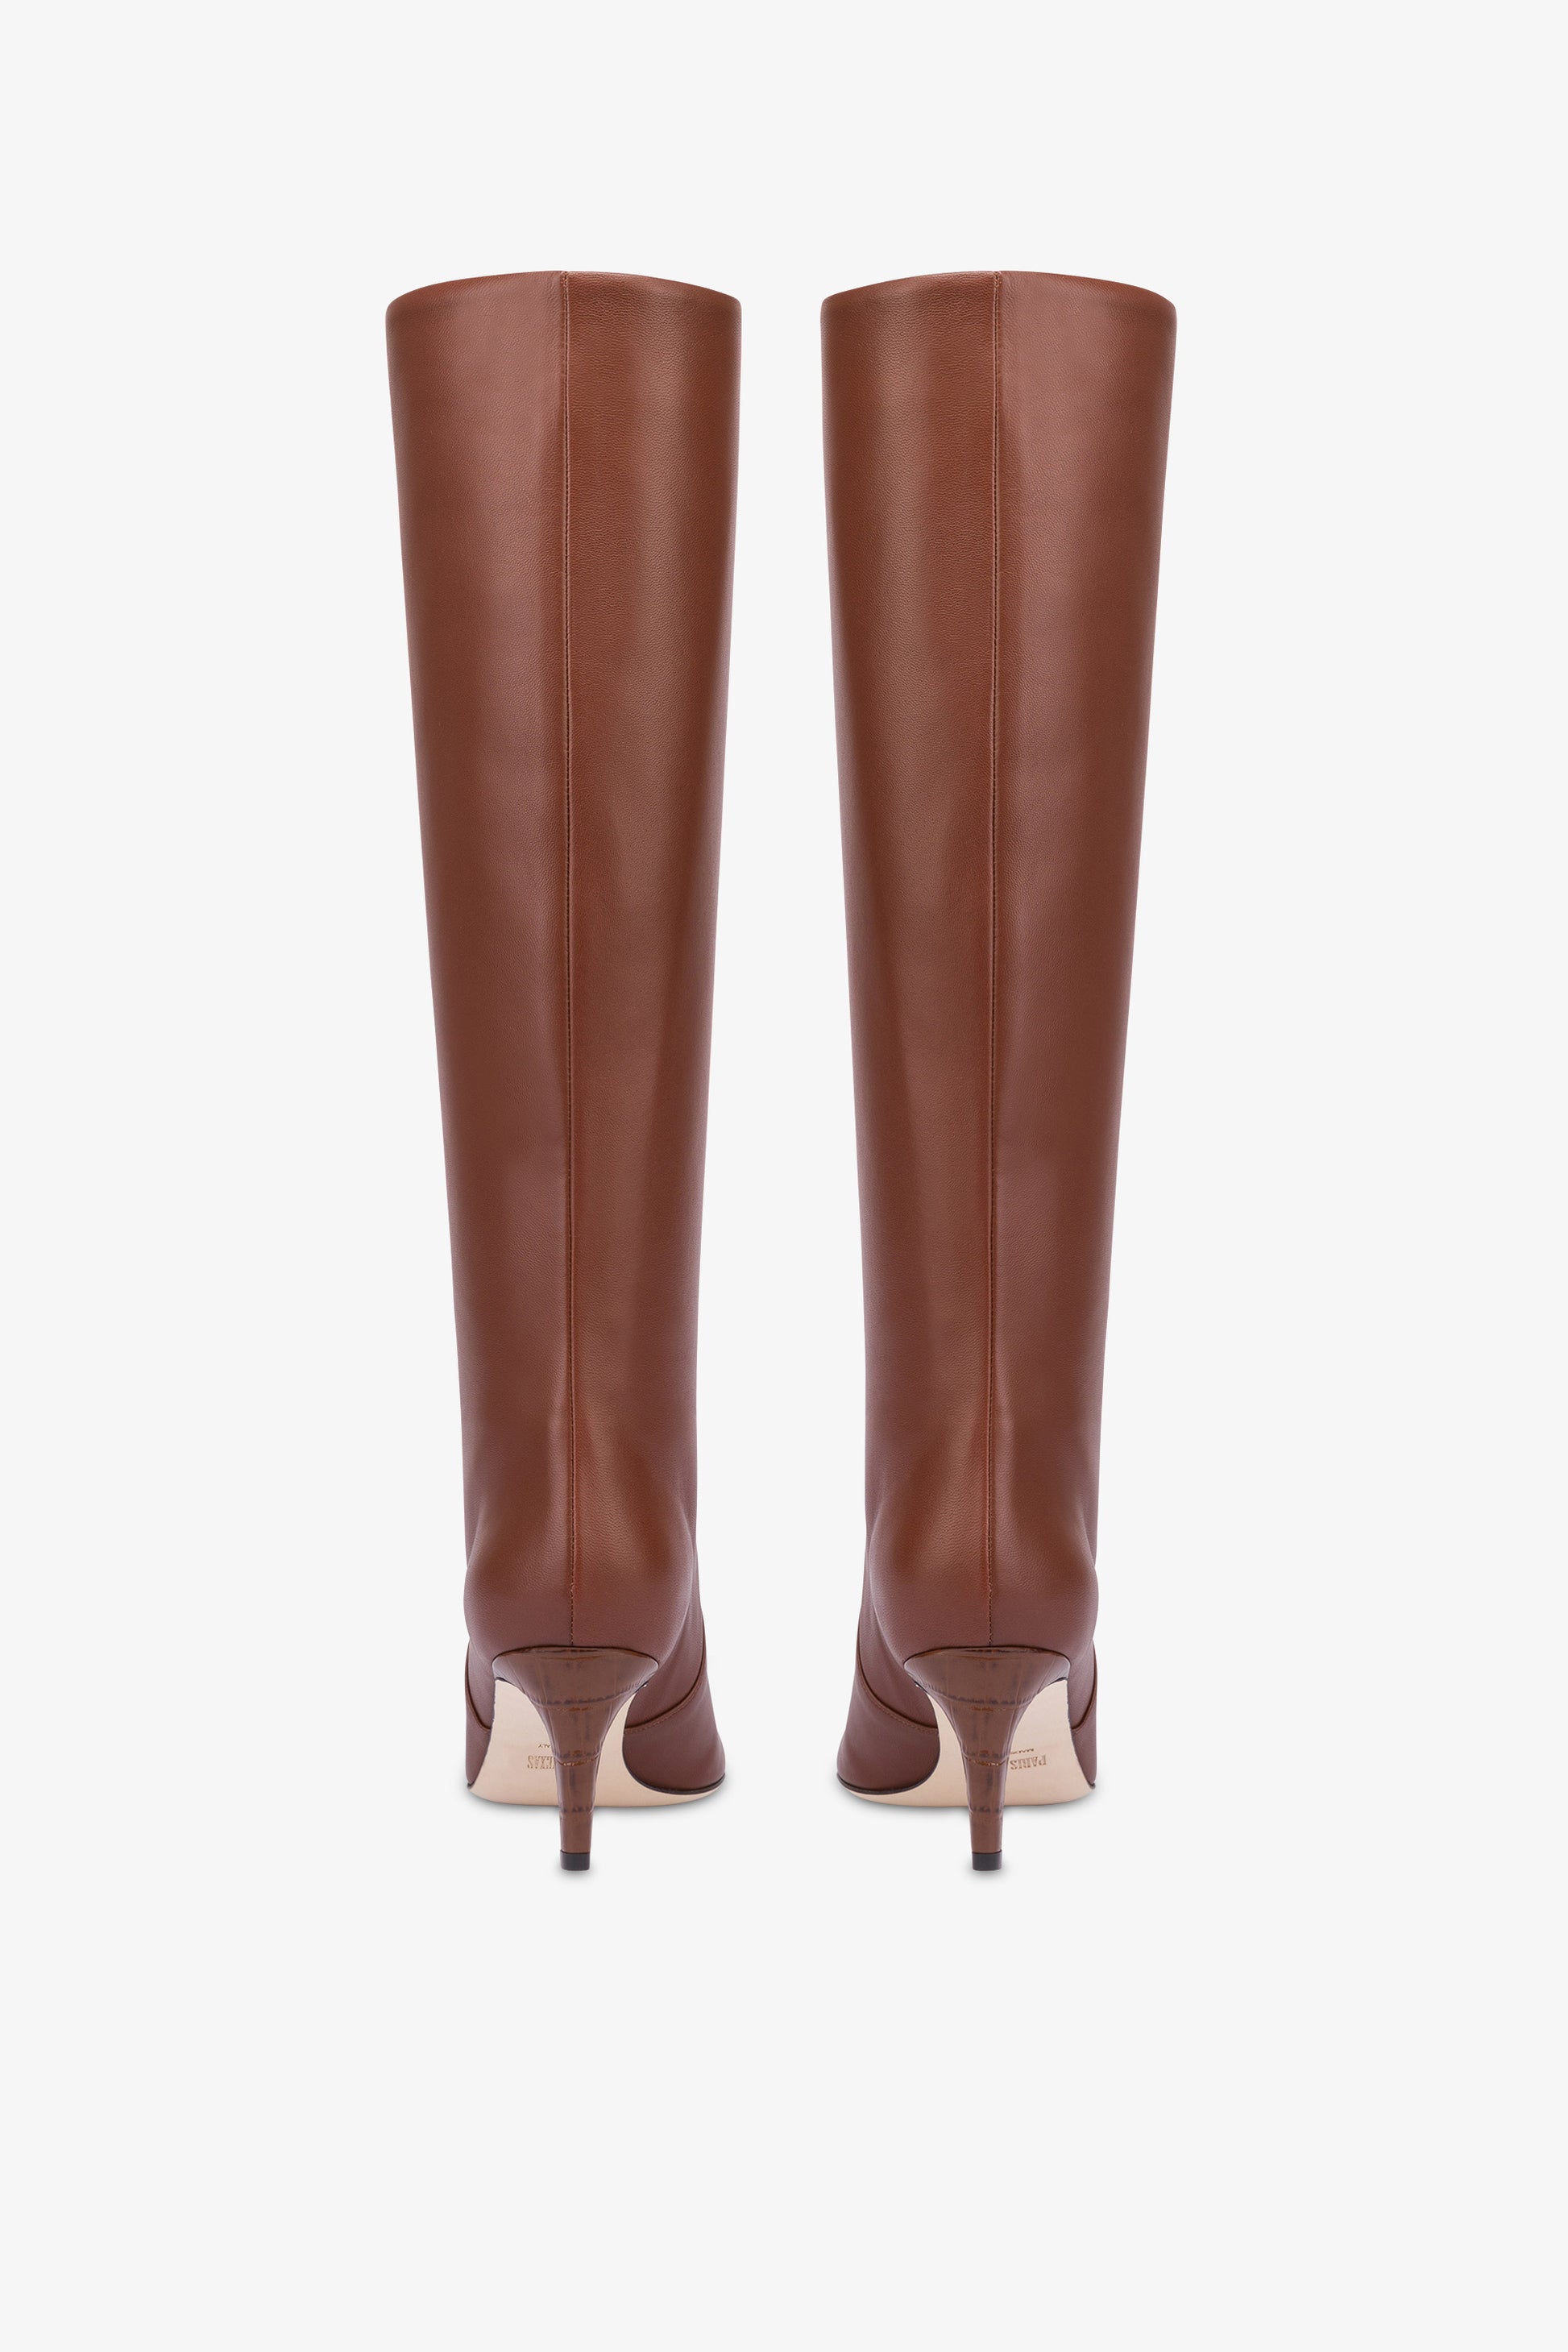 Pointed knee-high boots in smooth chocolate leather